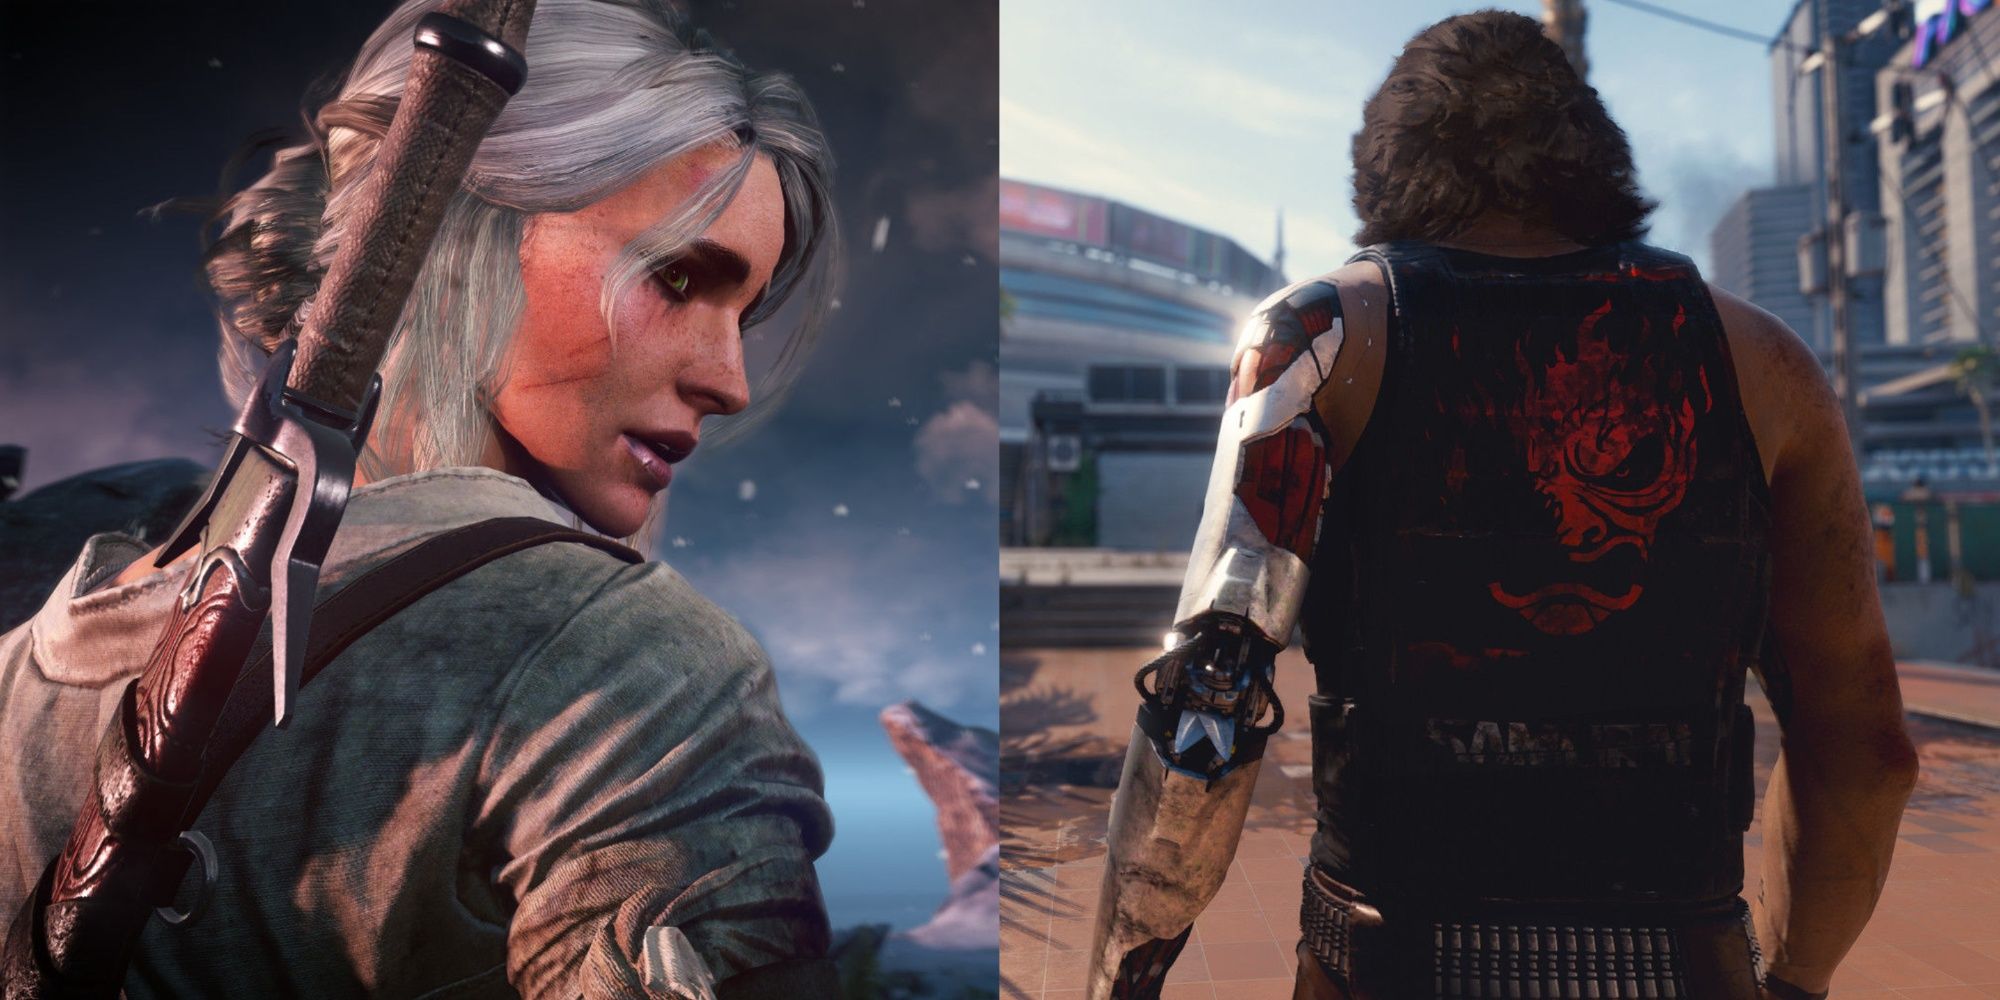 ciri in the witcher 3, and johnny silverhand in cyberpunk 2077